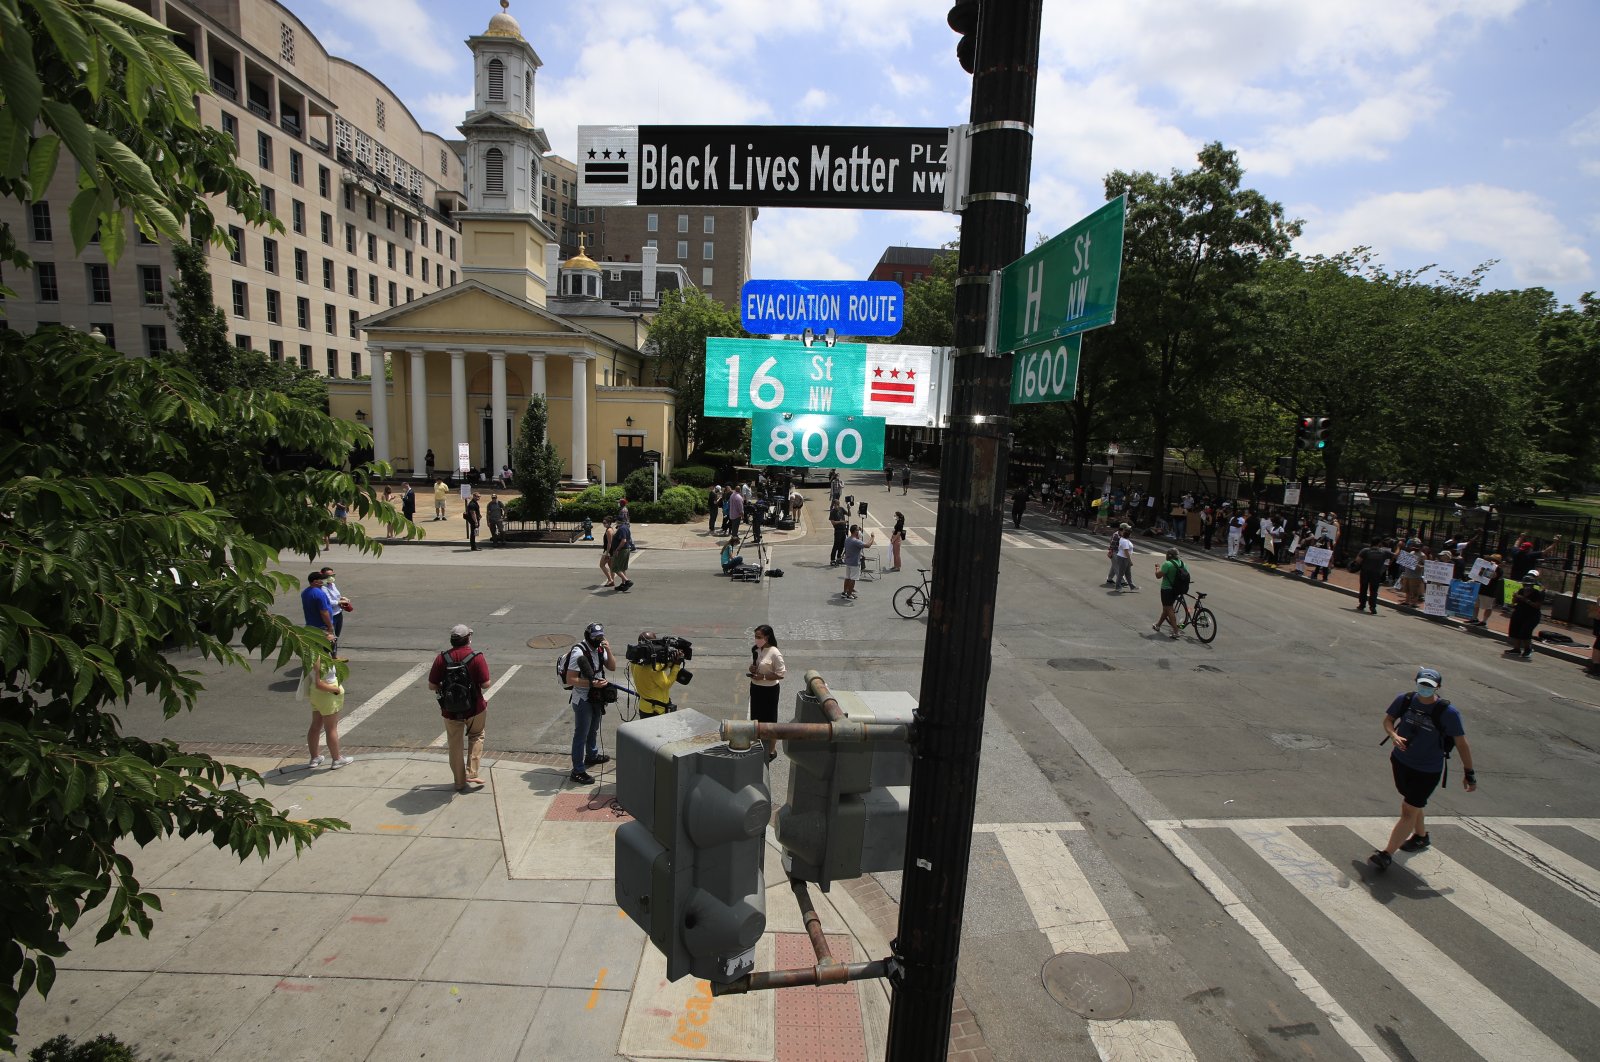 With St. John's Church in the background, people walk under a new street sign, Washington D.C. June 5, 2020. (AP Photo)